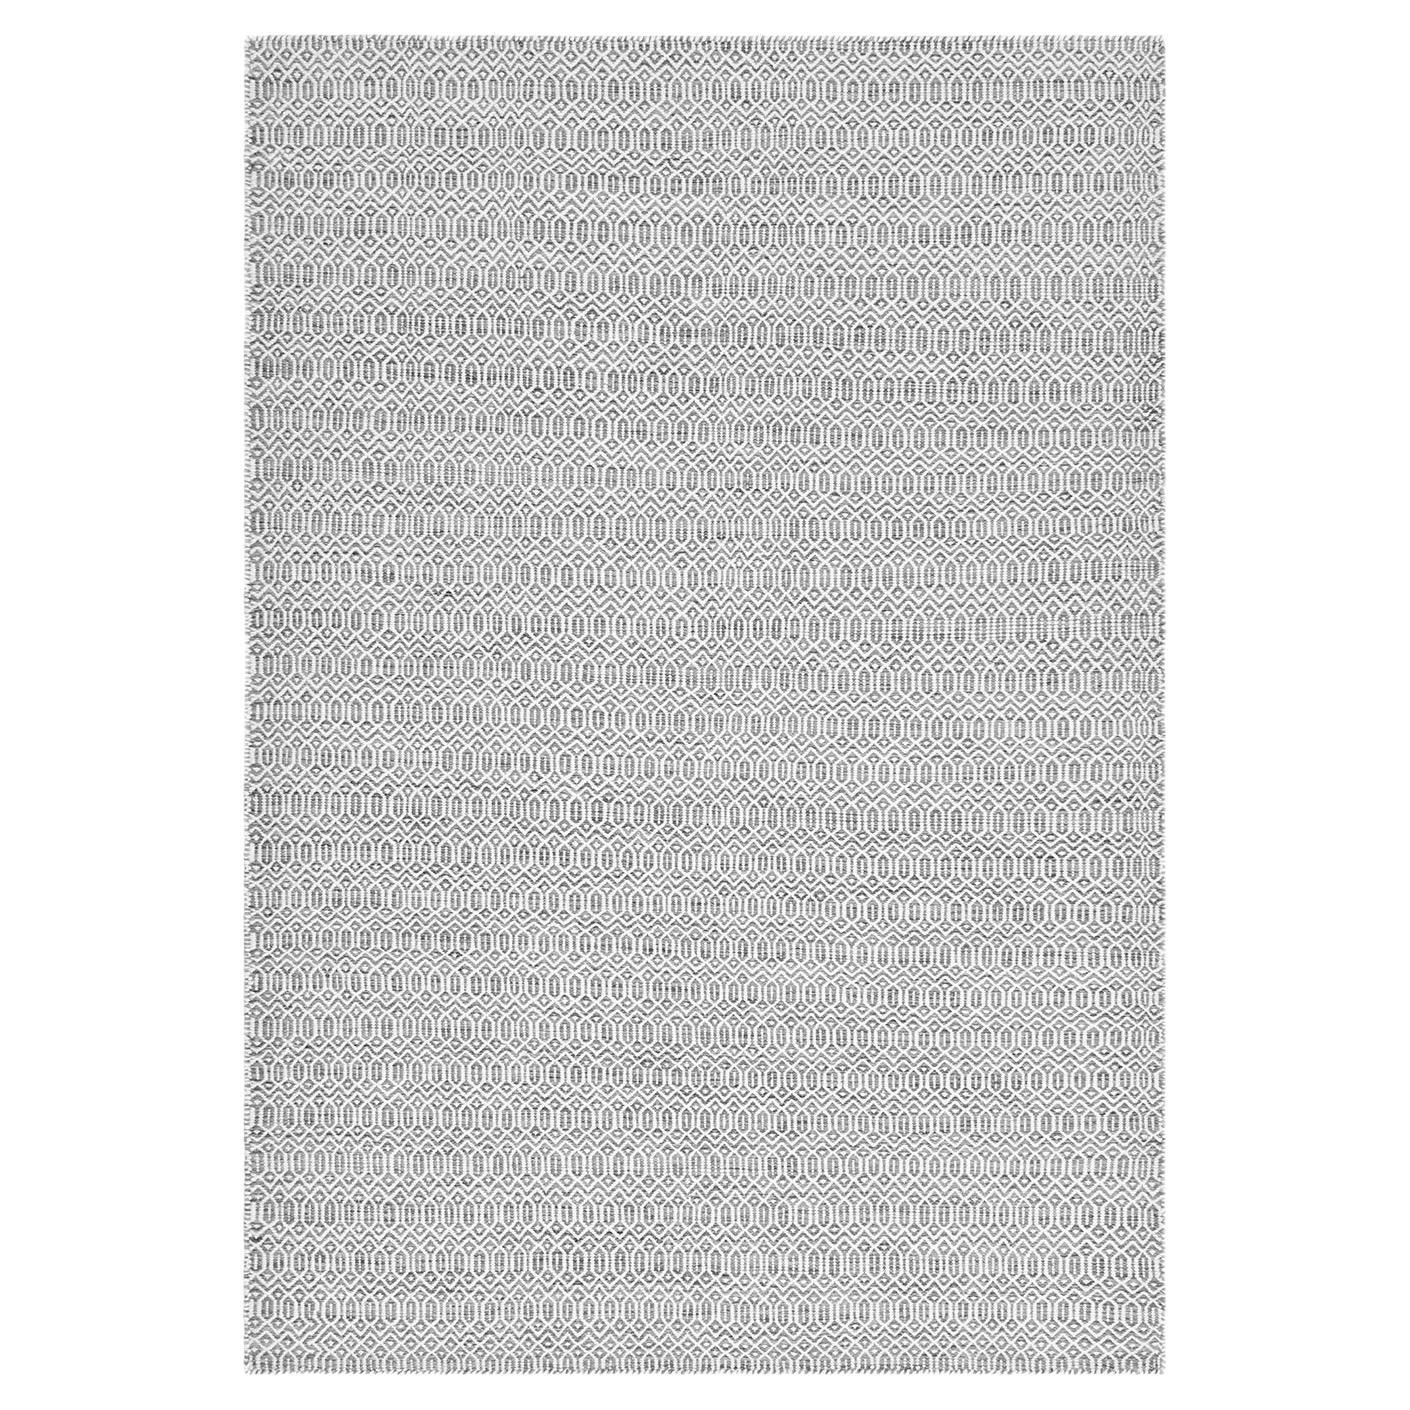 Solo Rugs Flatweave Geometric Hand Woven Gray Runner Area Rug For Sale